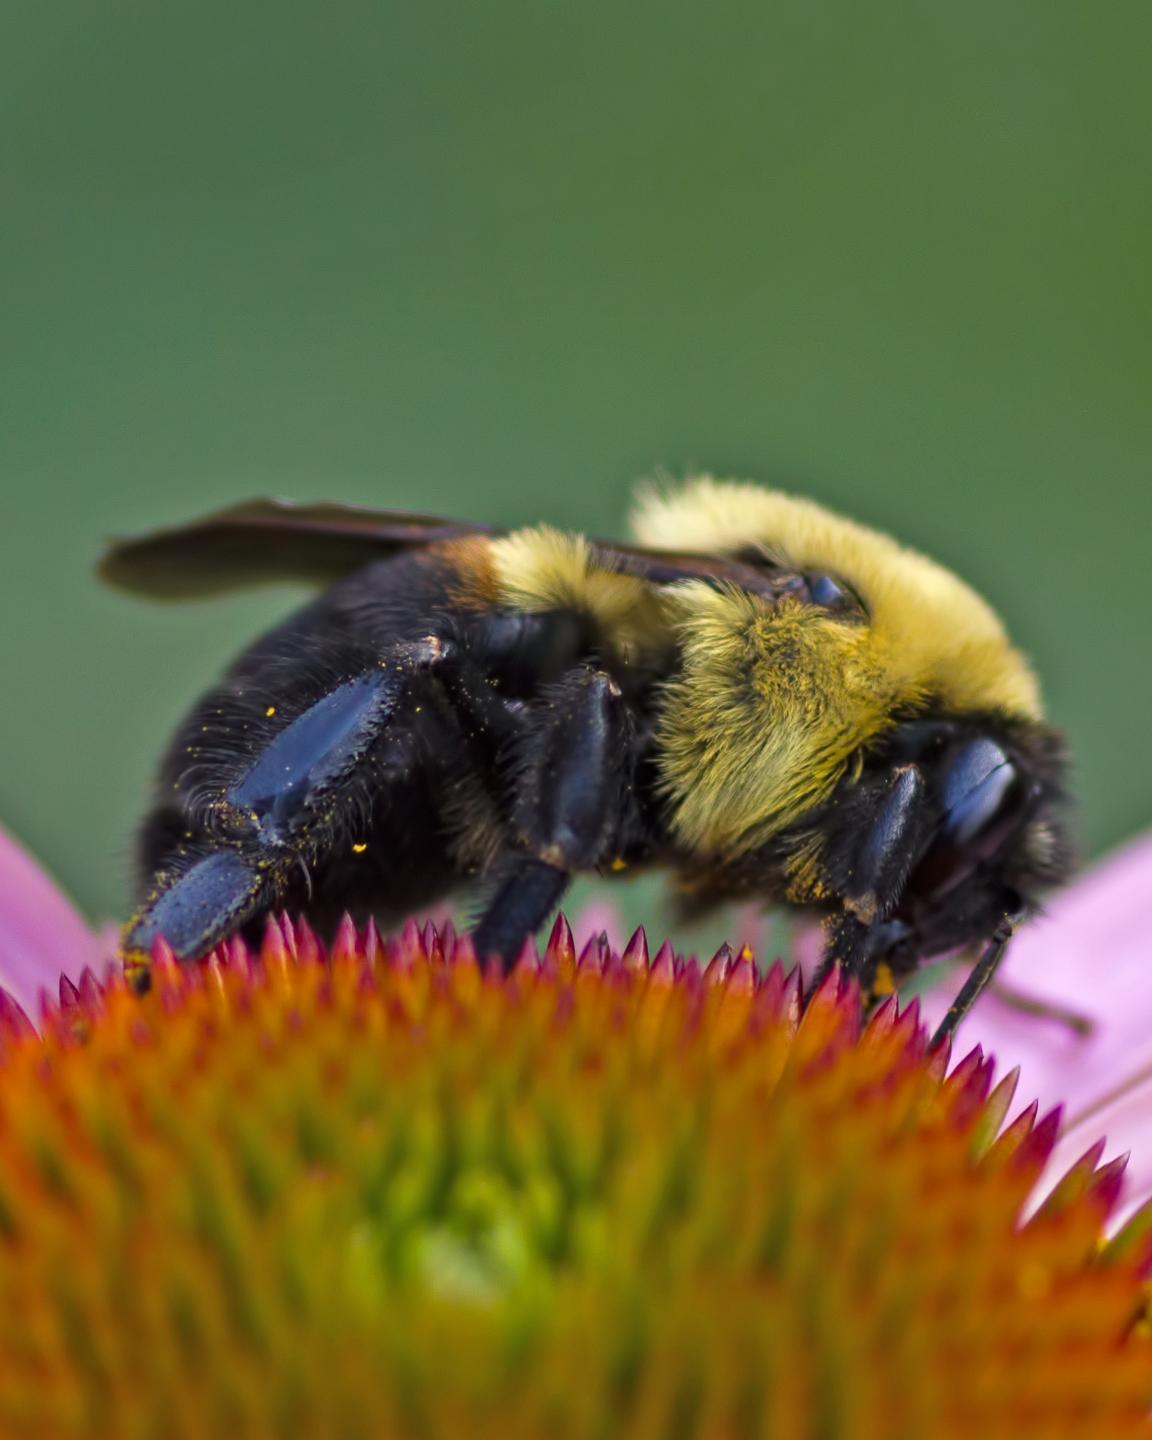 Brown-belted bumble bee Photo by Rob Dickerson